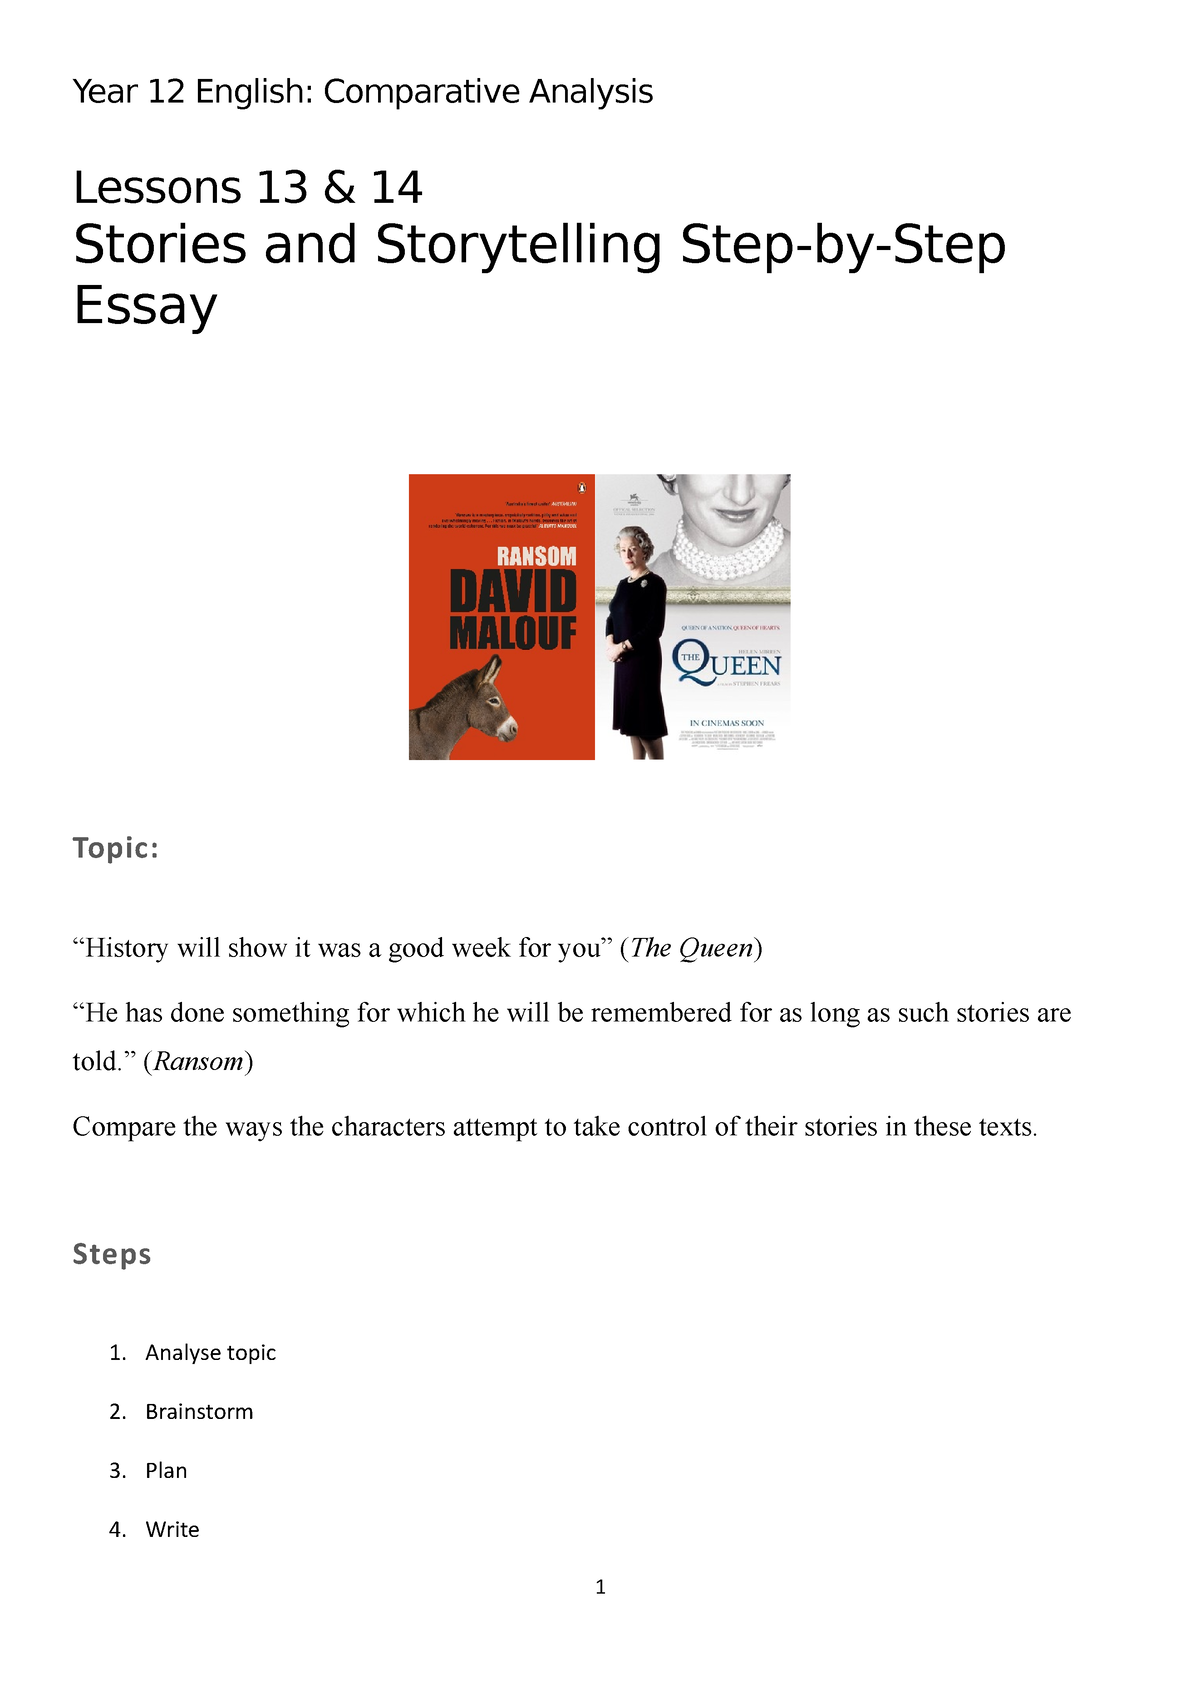 essay topics for ransom and the queen